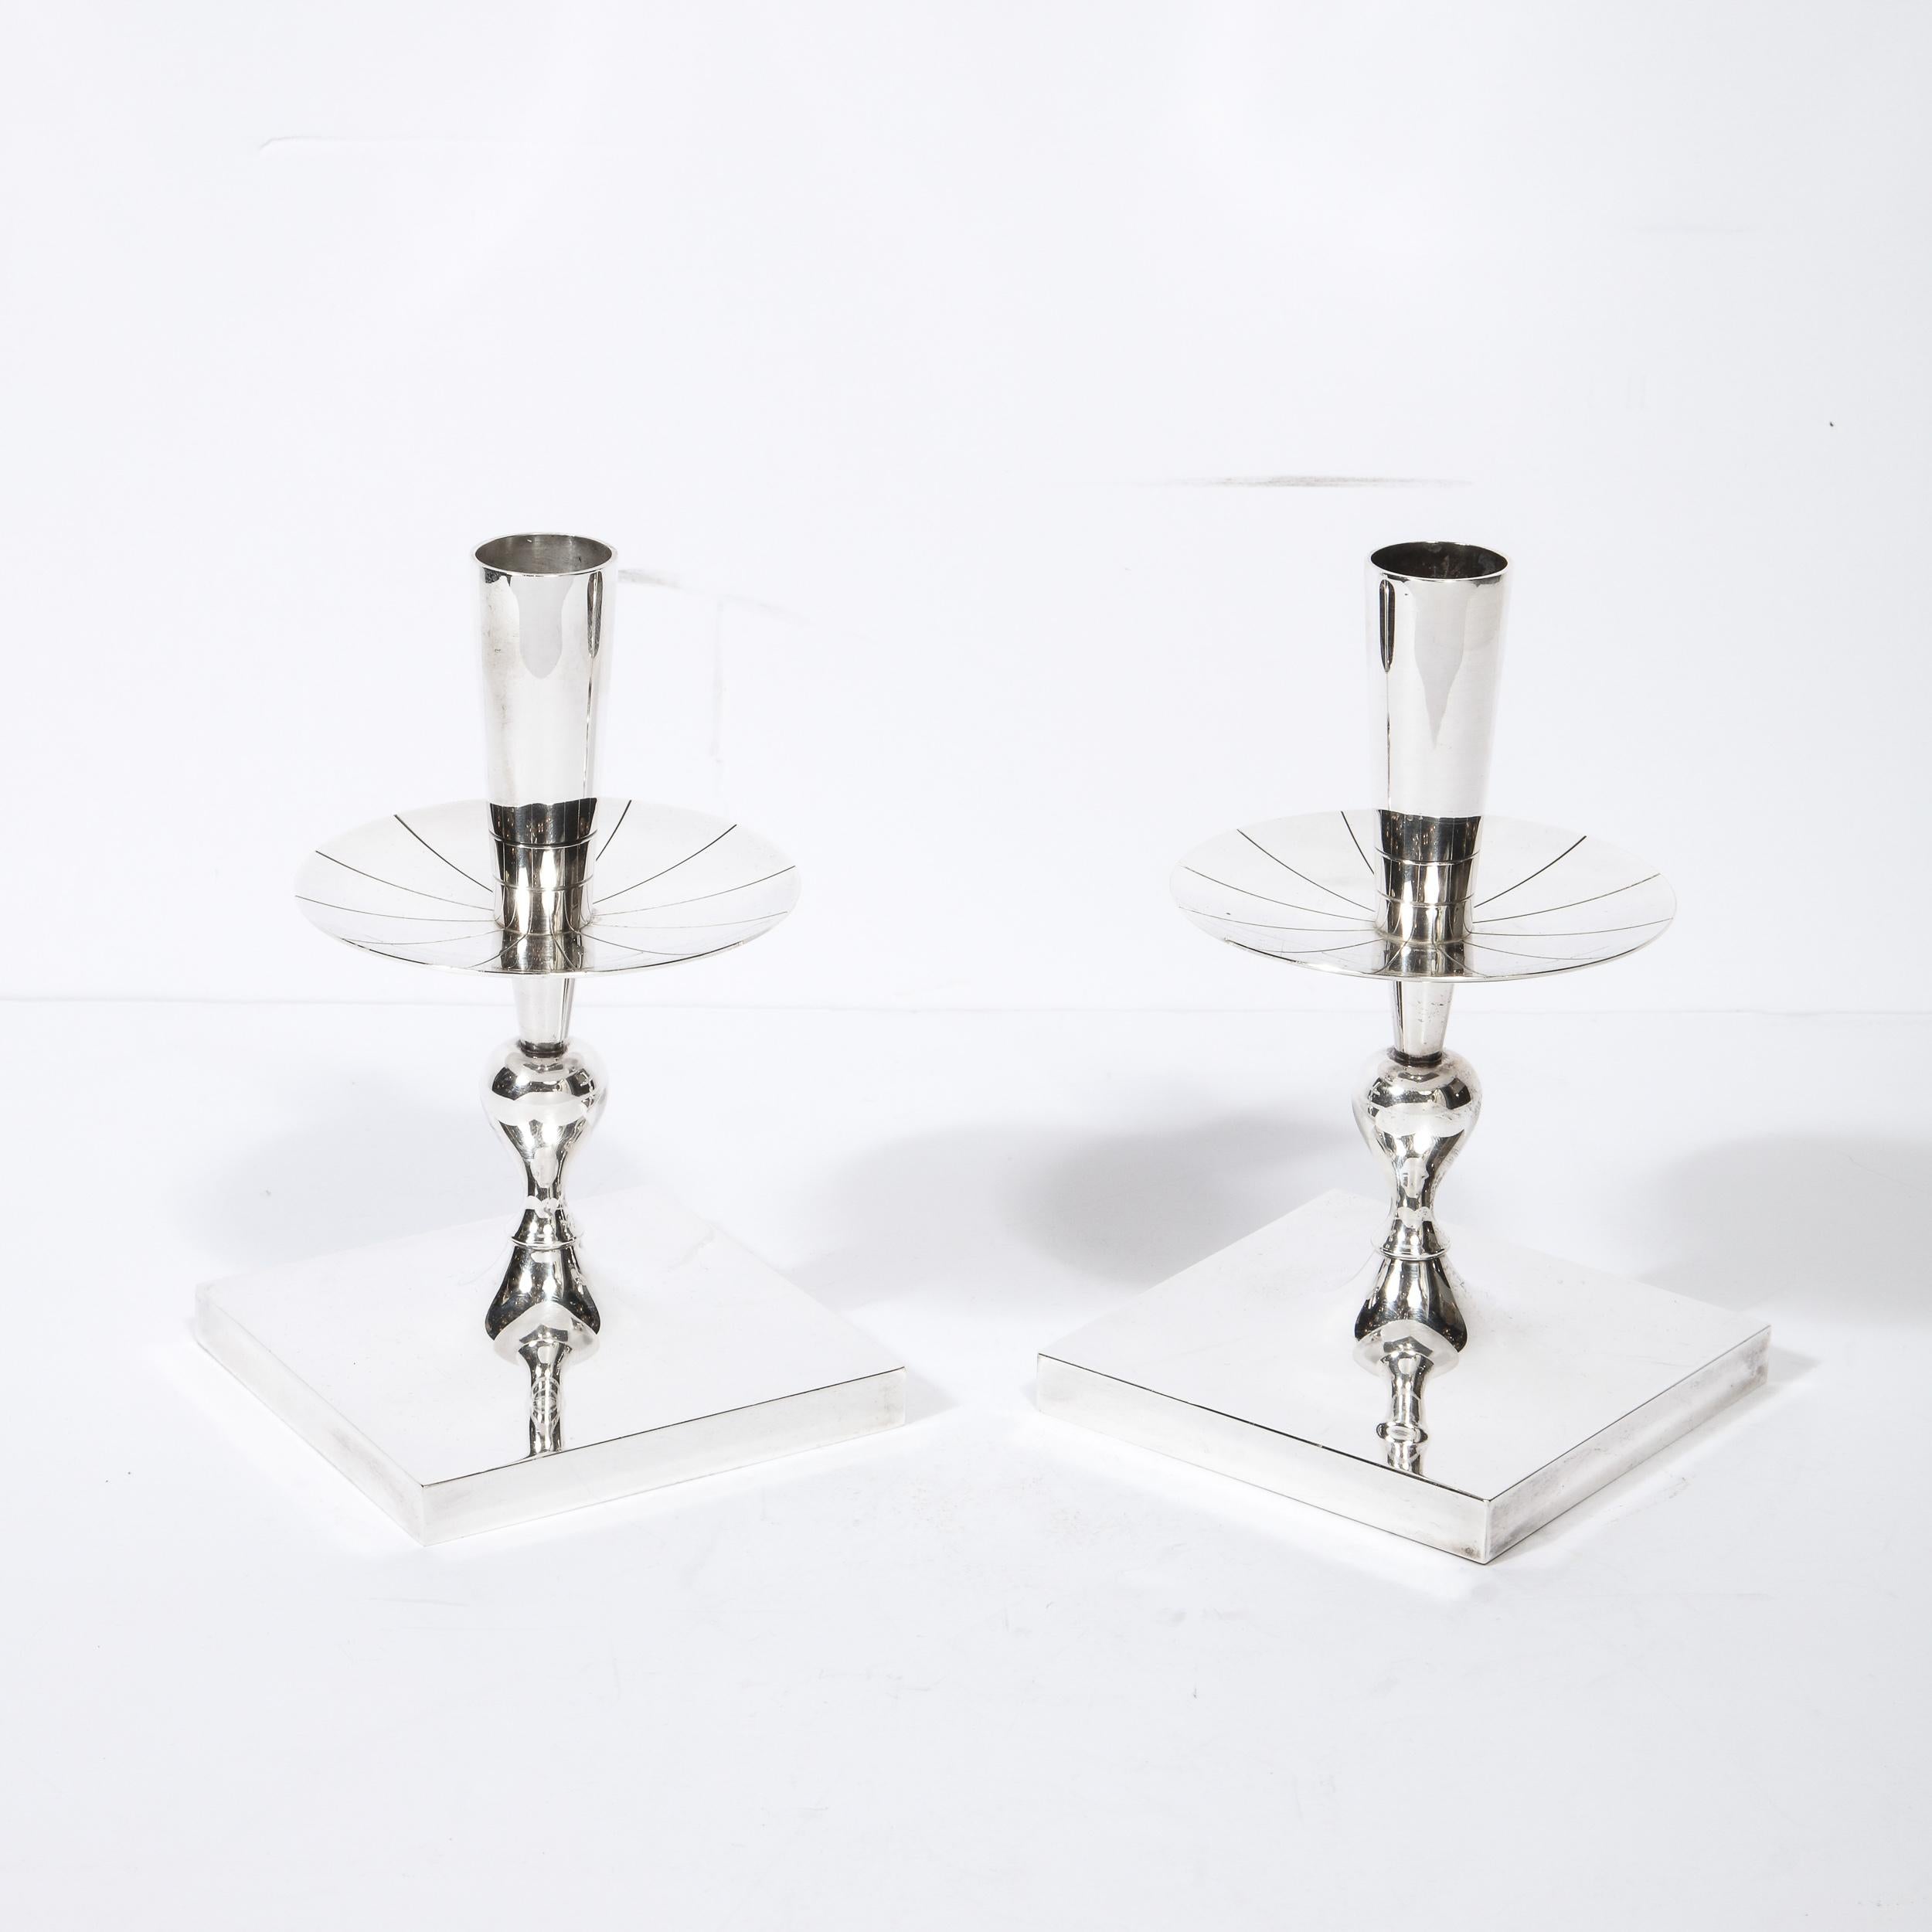 This gorgeous pair of silver plated candlesticks were designed by Tommi Parzinger for Dorlyn Silversmiths in the United States circa 1950. They feature volumetric square bases; sculptural undulating bodies; and circular striated bobeches- all in